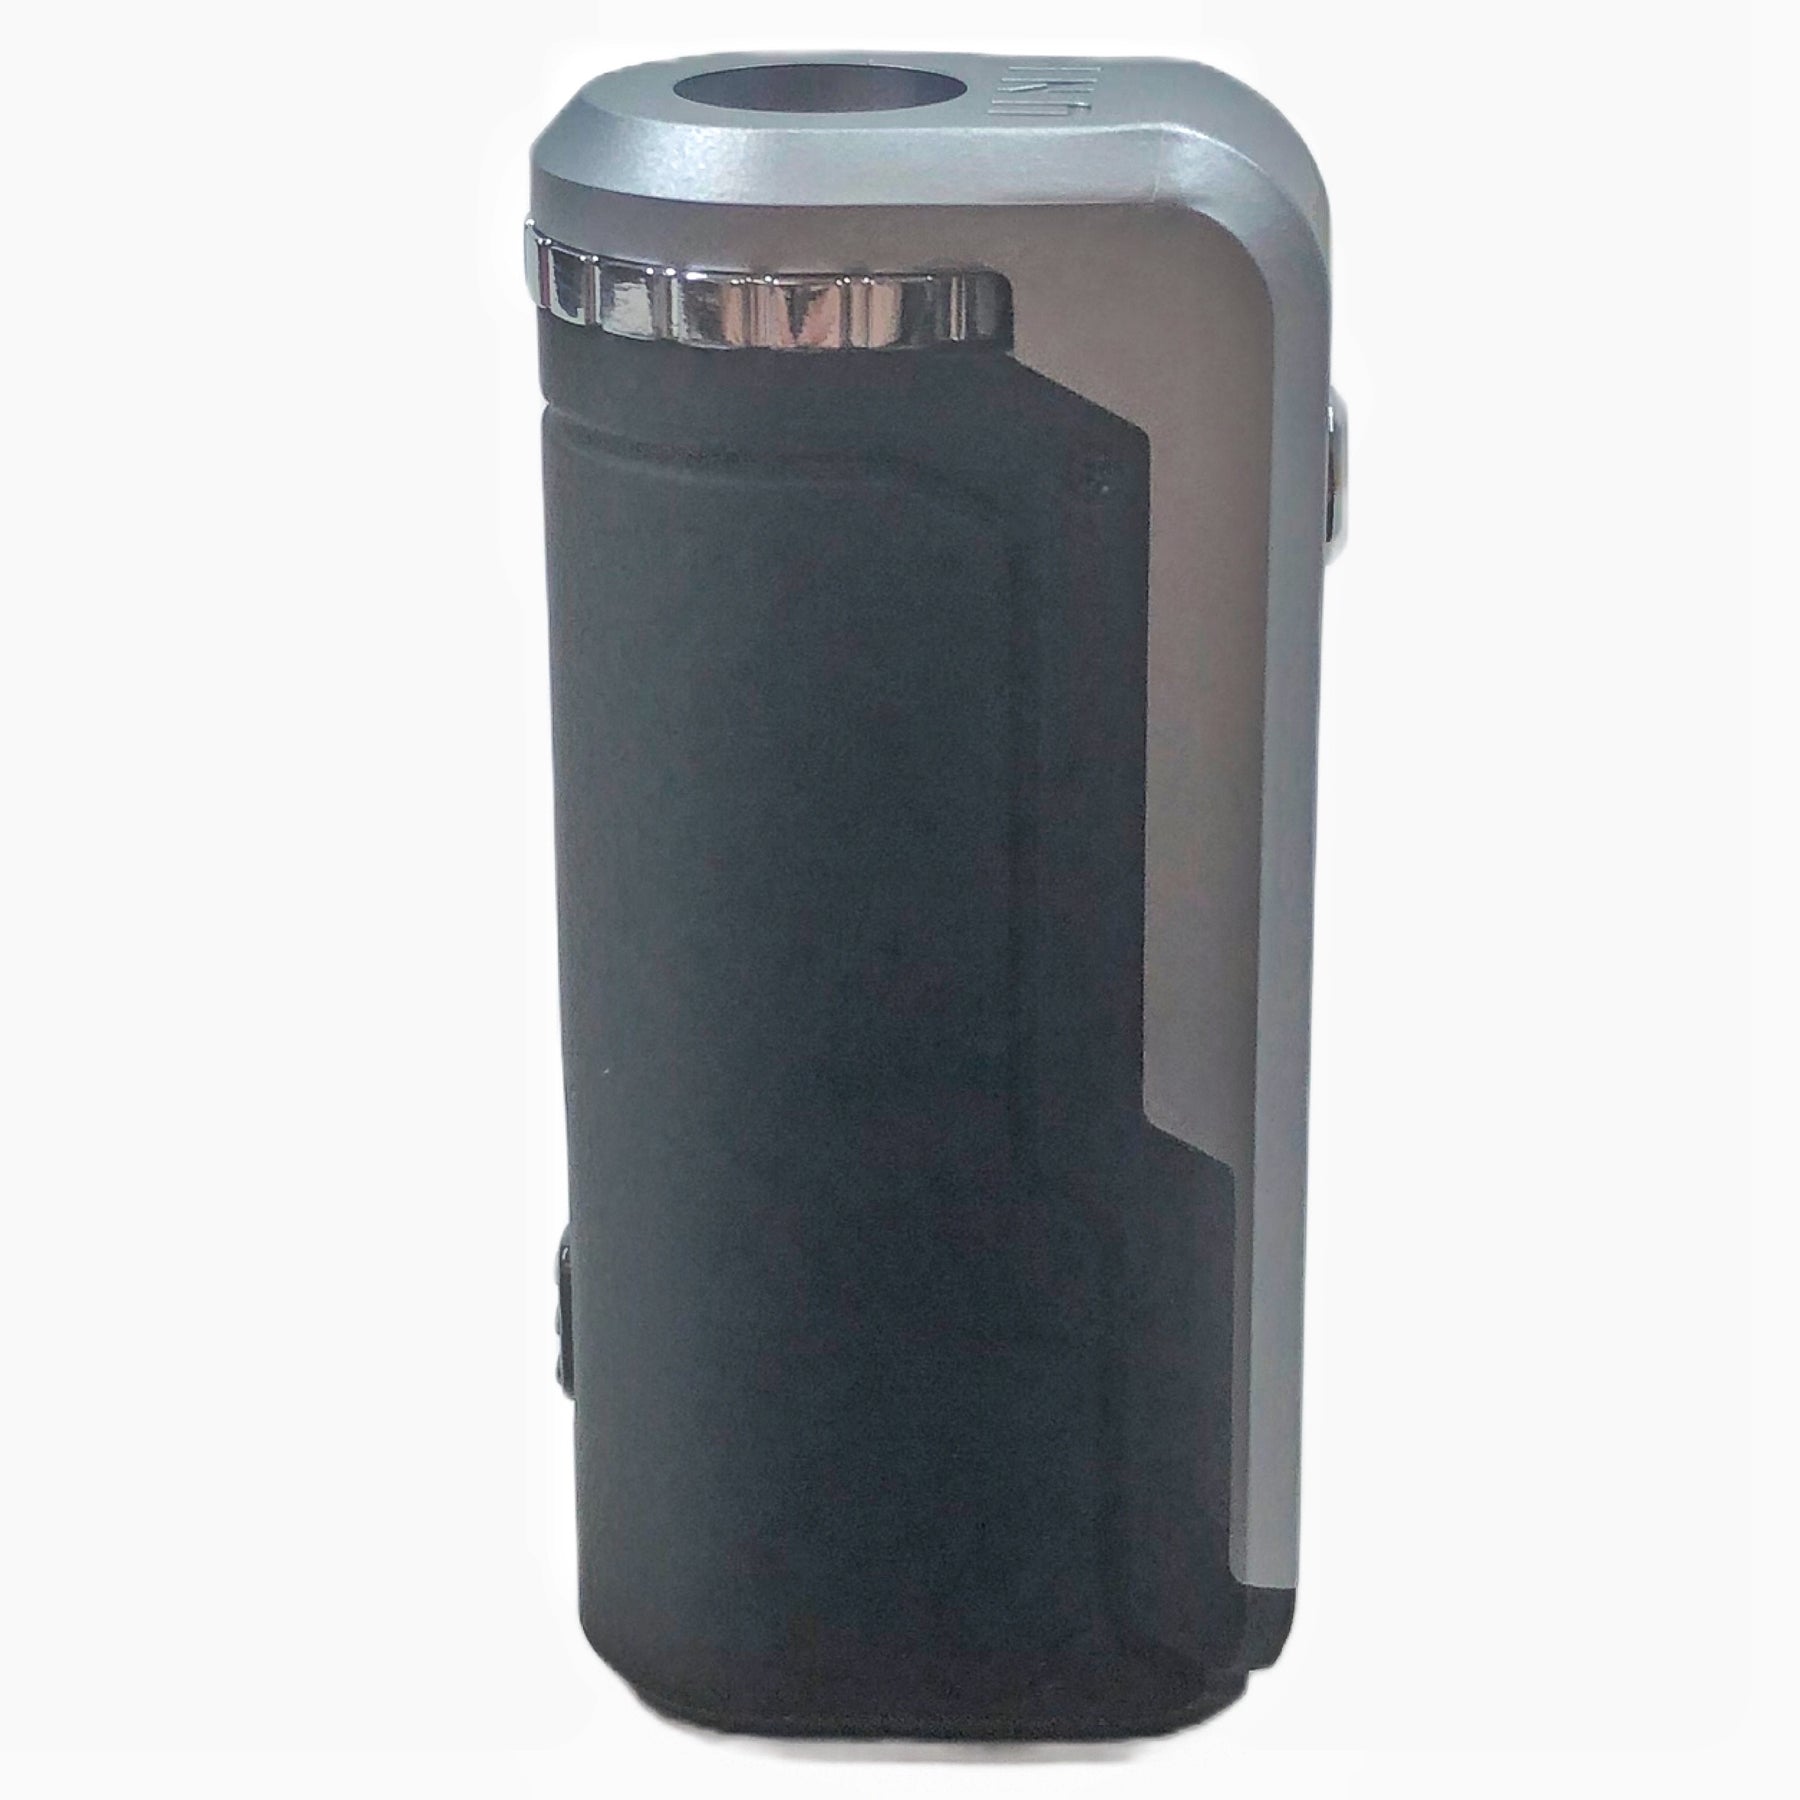 Silver and Black Herb Vaporizer